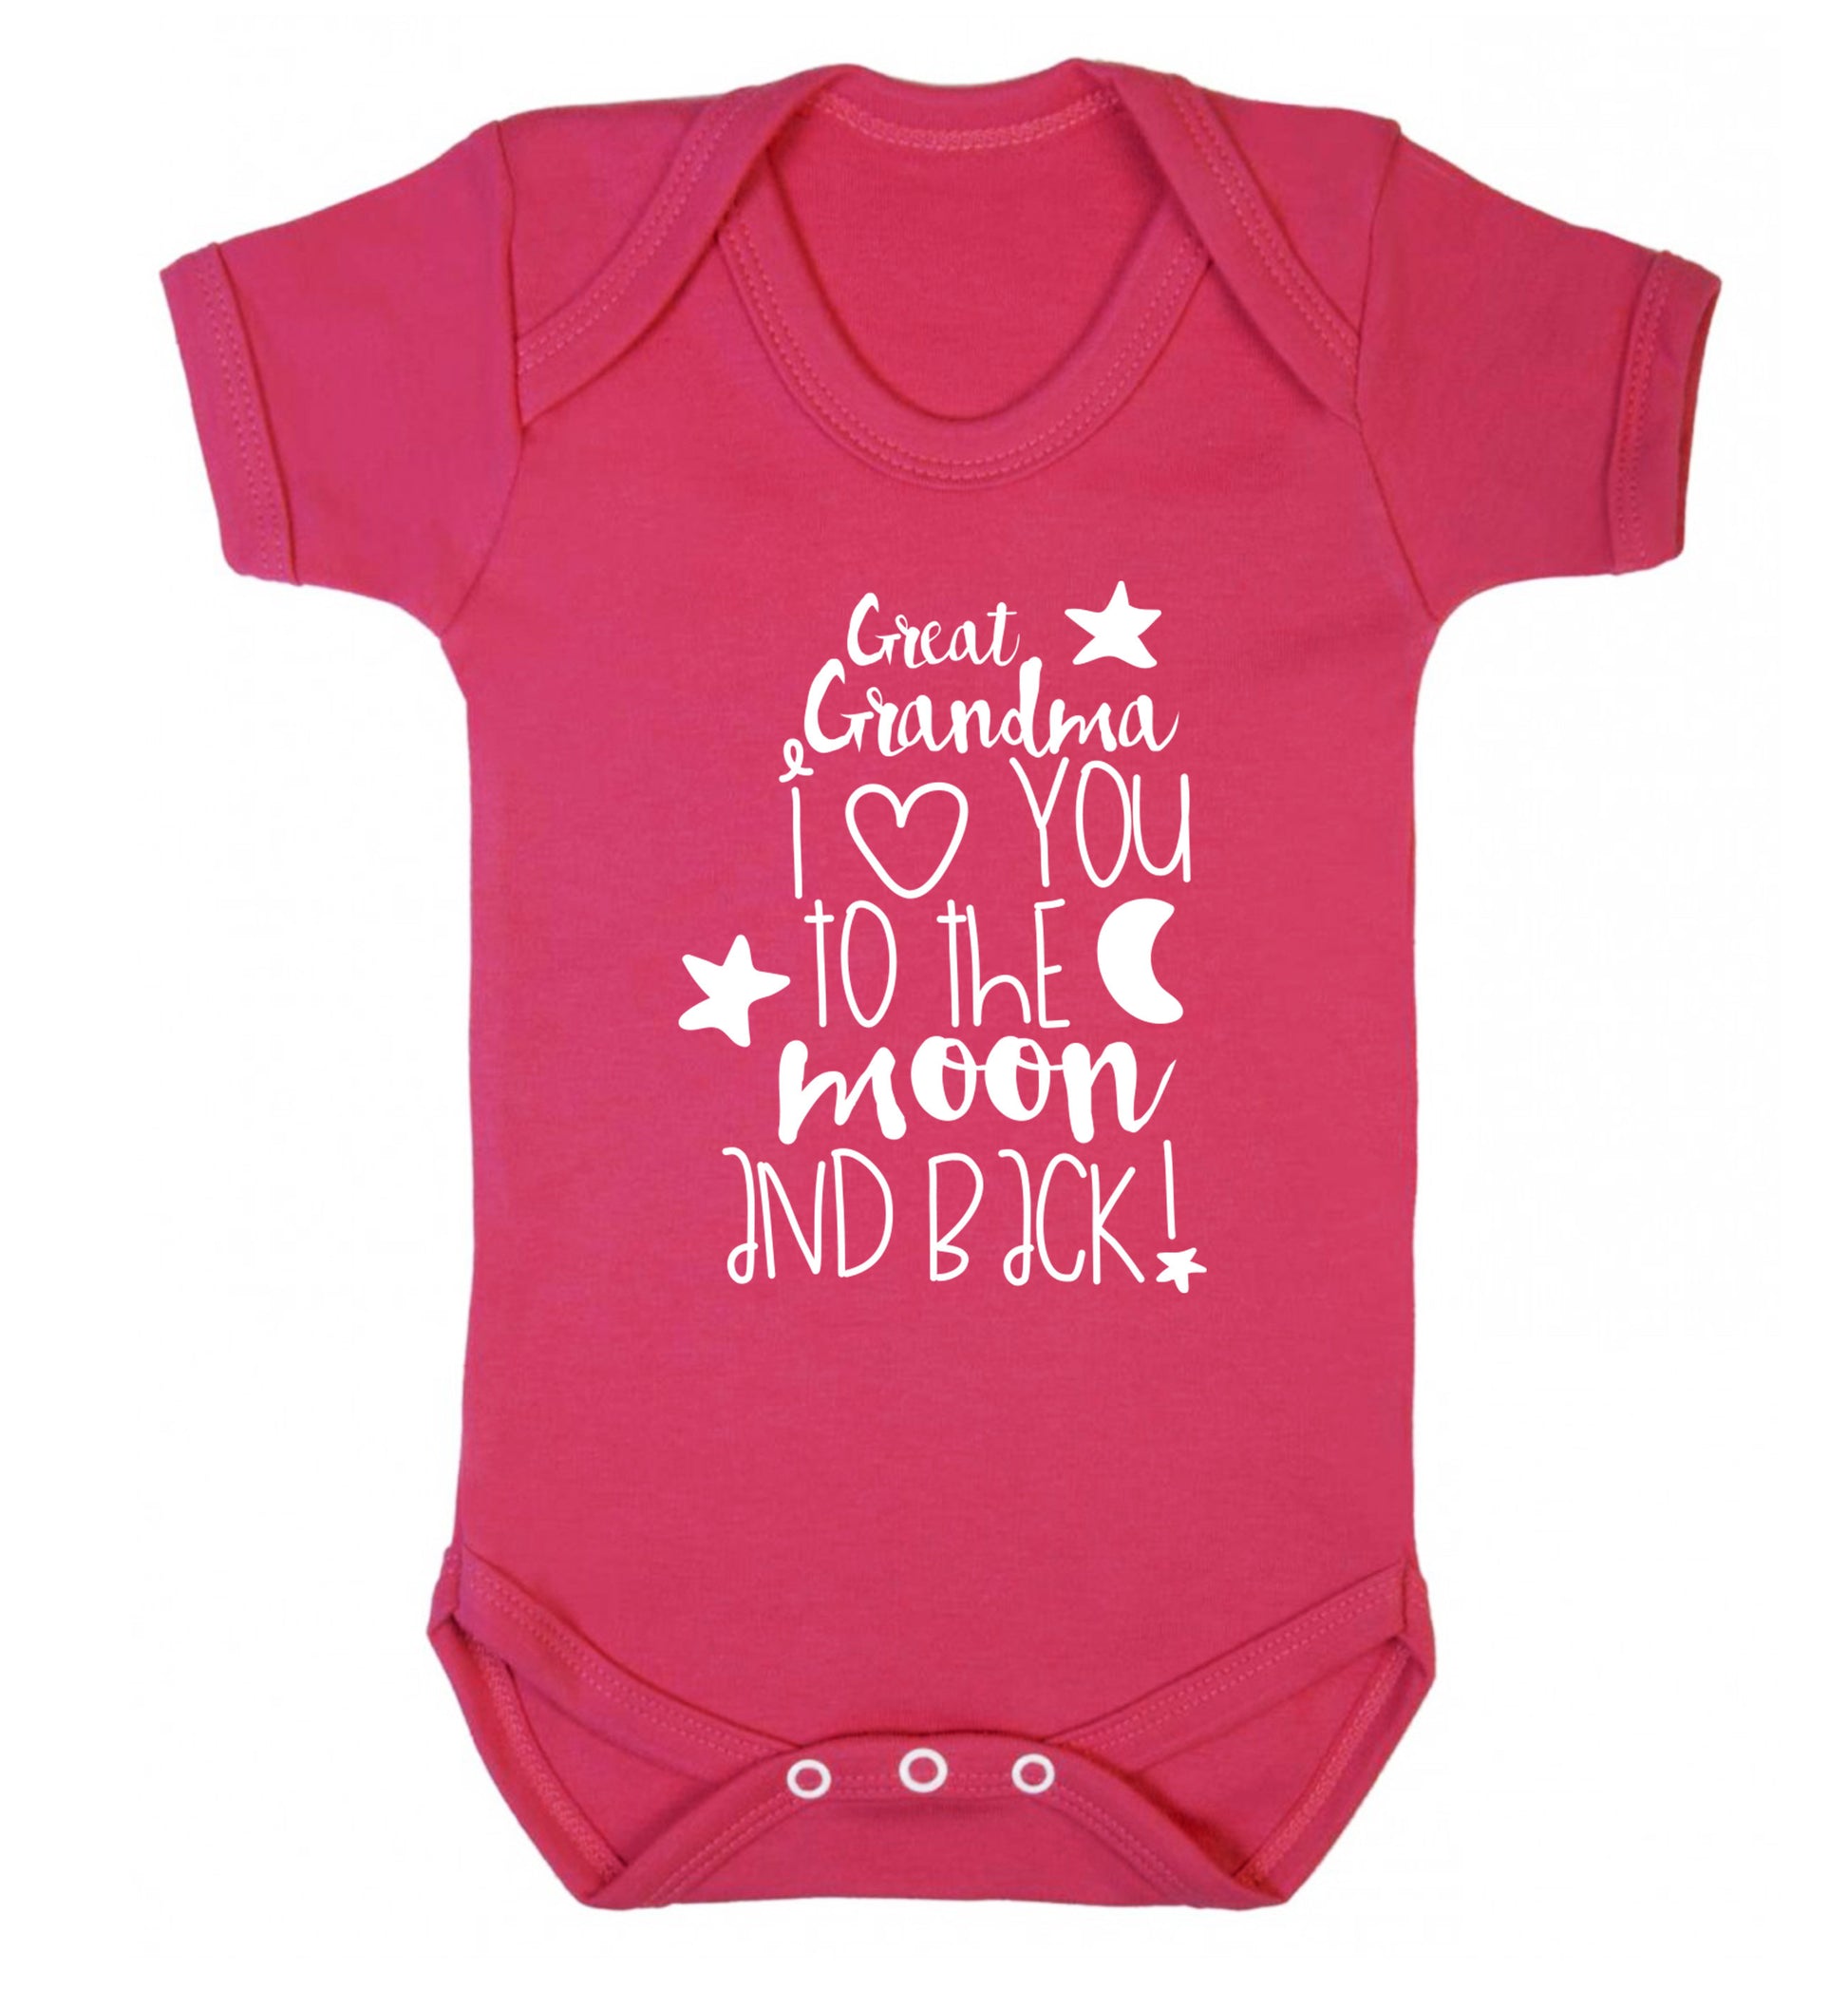 Great Grandma I love you to the moon and back Baby Vest dark pink 18-24 months